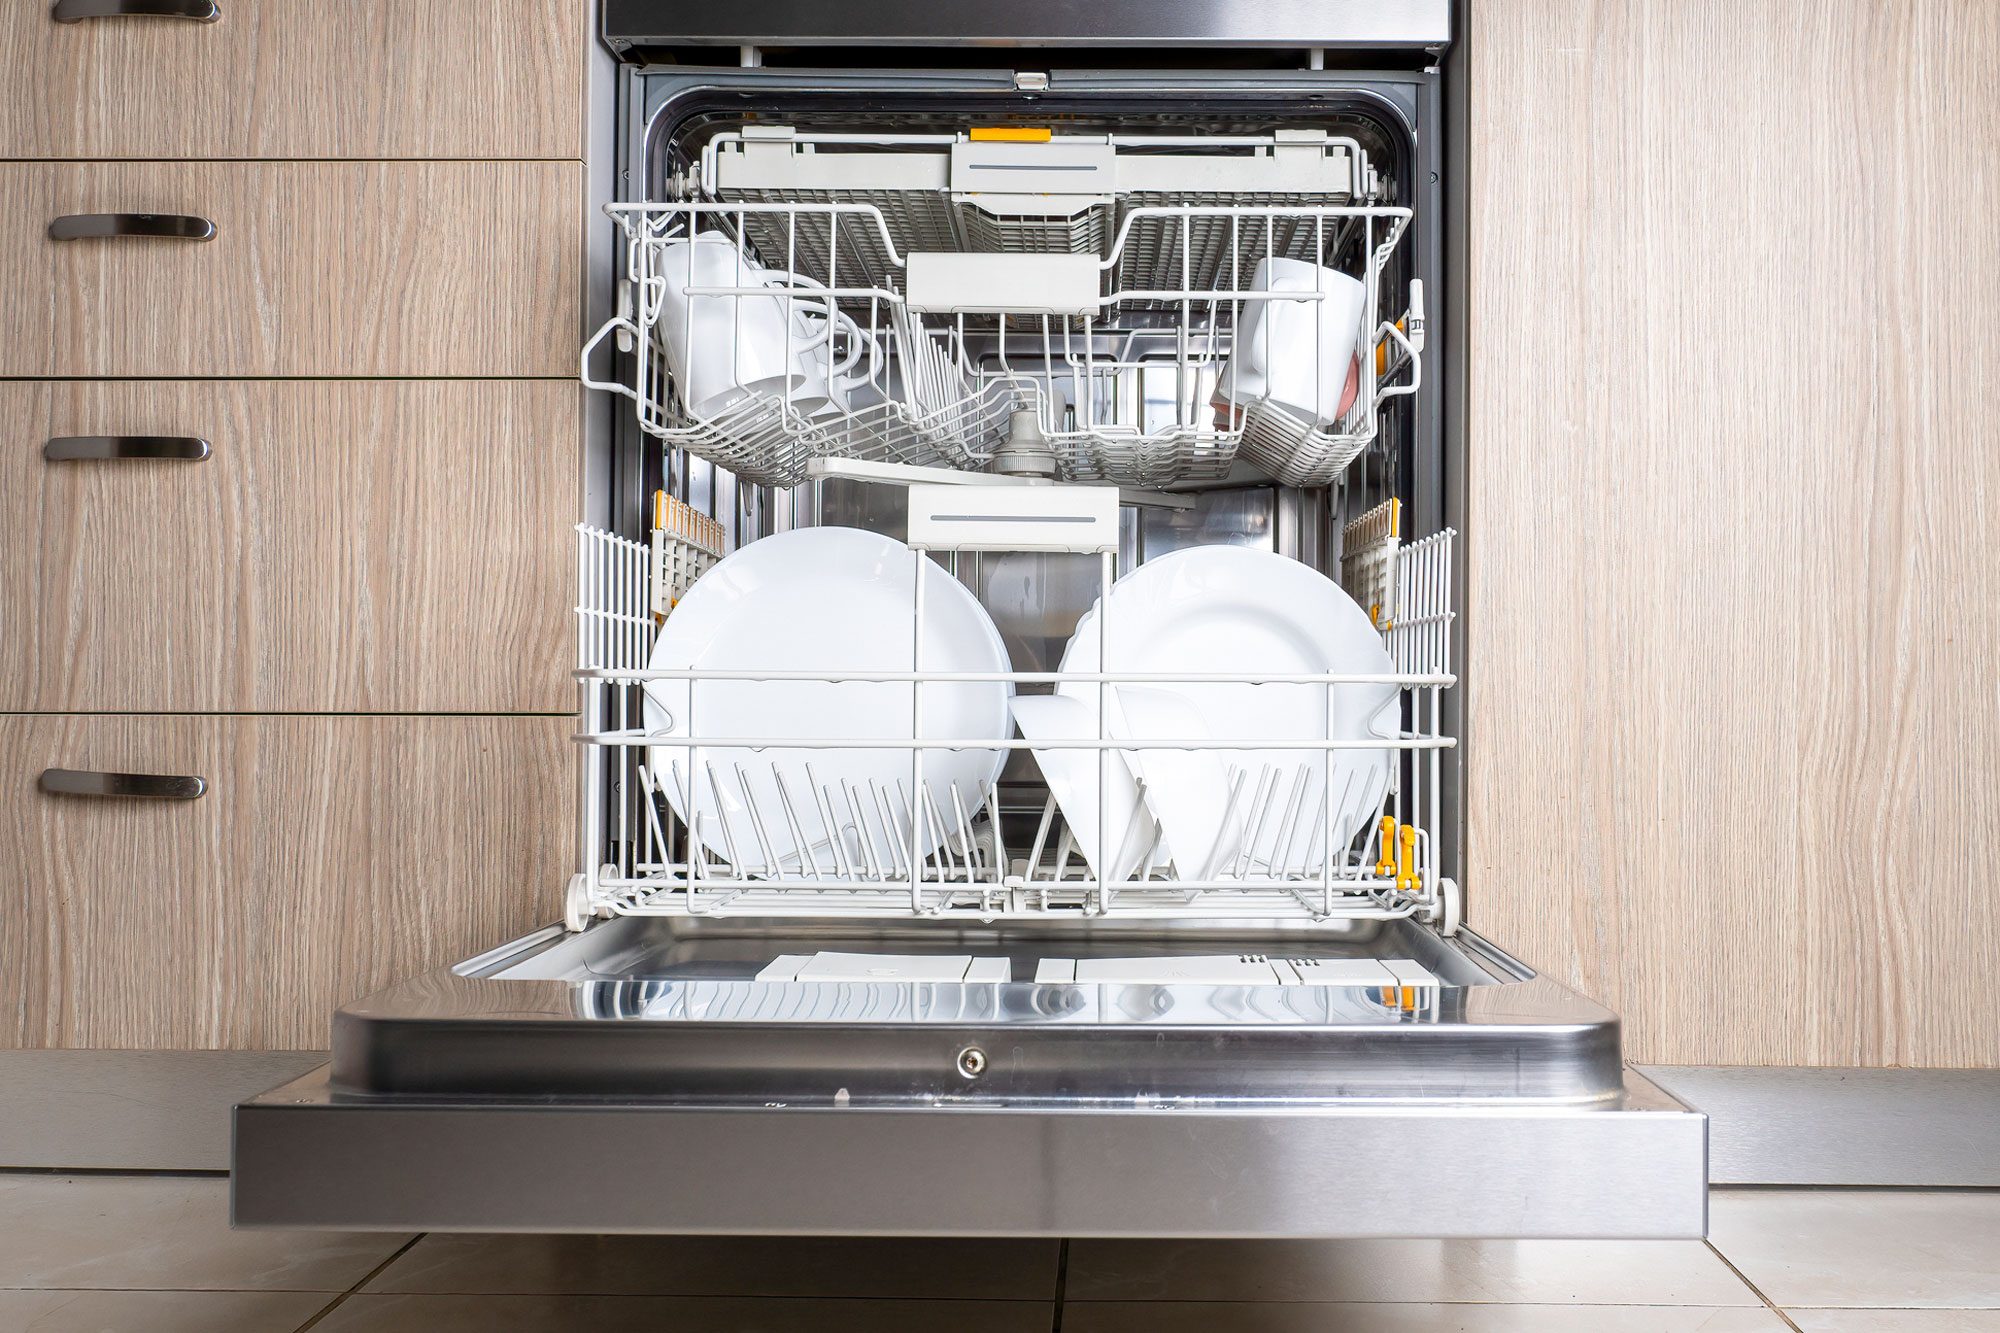 https://www.rd.com/wp-content/uploads/2023/11/Plates-and-dishes-in-the-built-in-dishwasher-in-kitchen-GettyImages-1403871214_KSedit.jpg?fit=700%2C1024